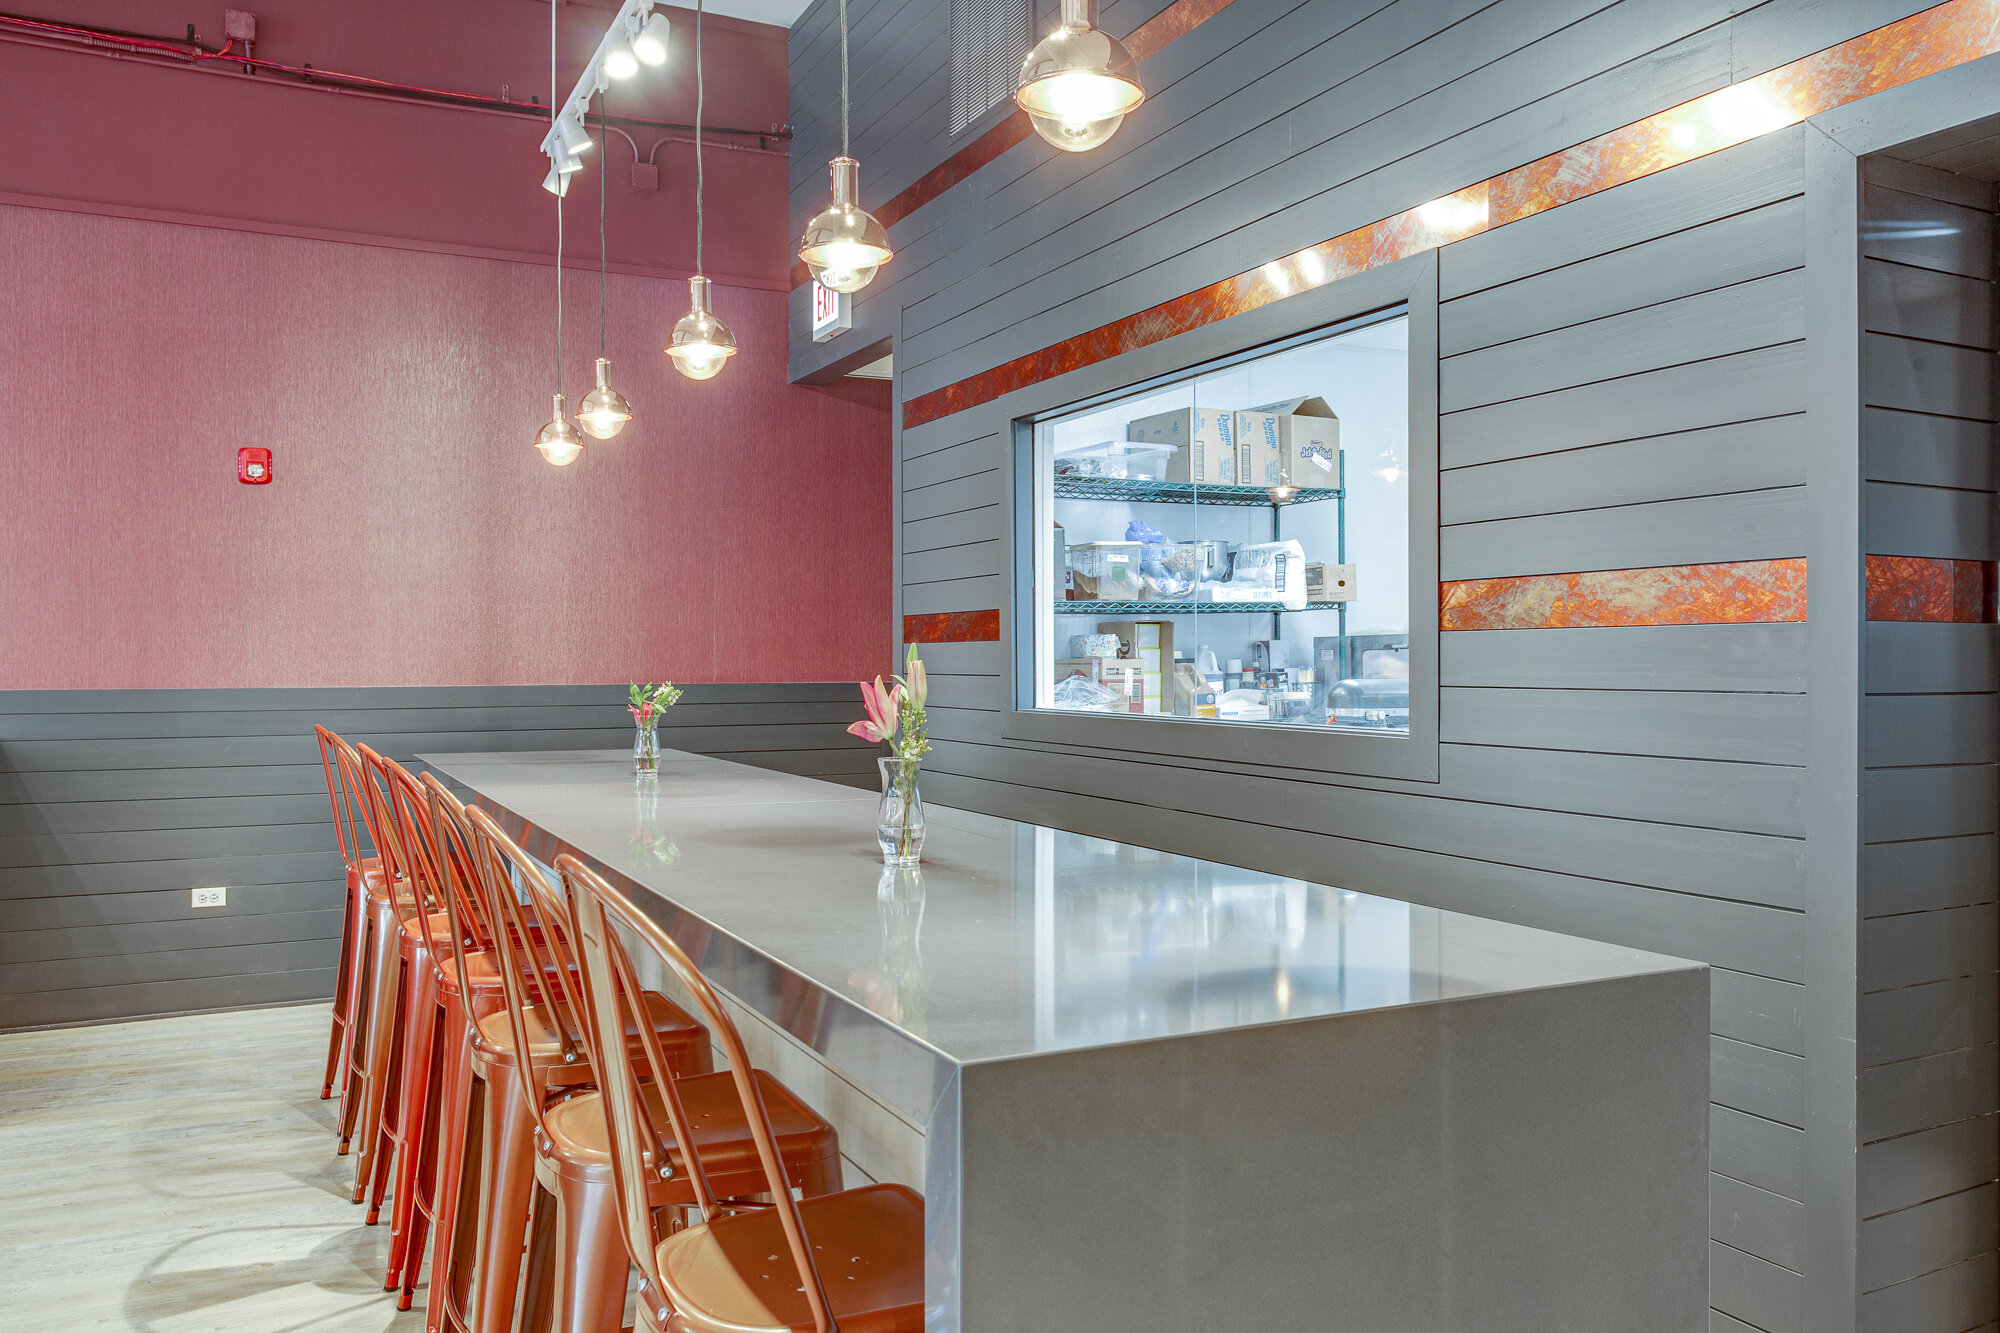 Inviting restaurant seating with cooper stools, Mitzi pendent lights and an accent wall in shiplap with copper painted in Benjamin Moore Wrought Iron (2124-10) in La Grange.